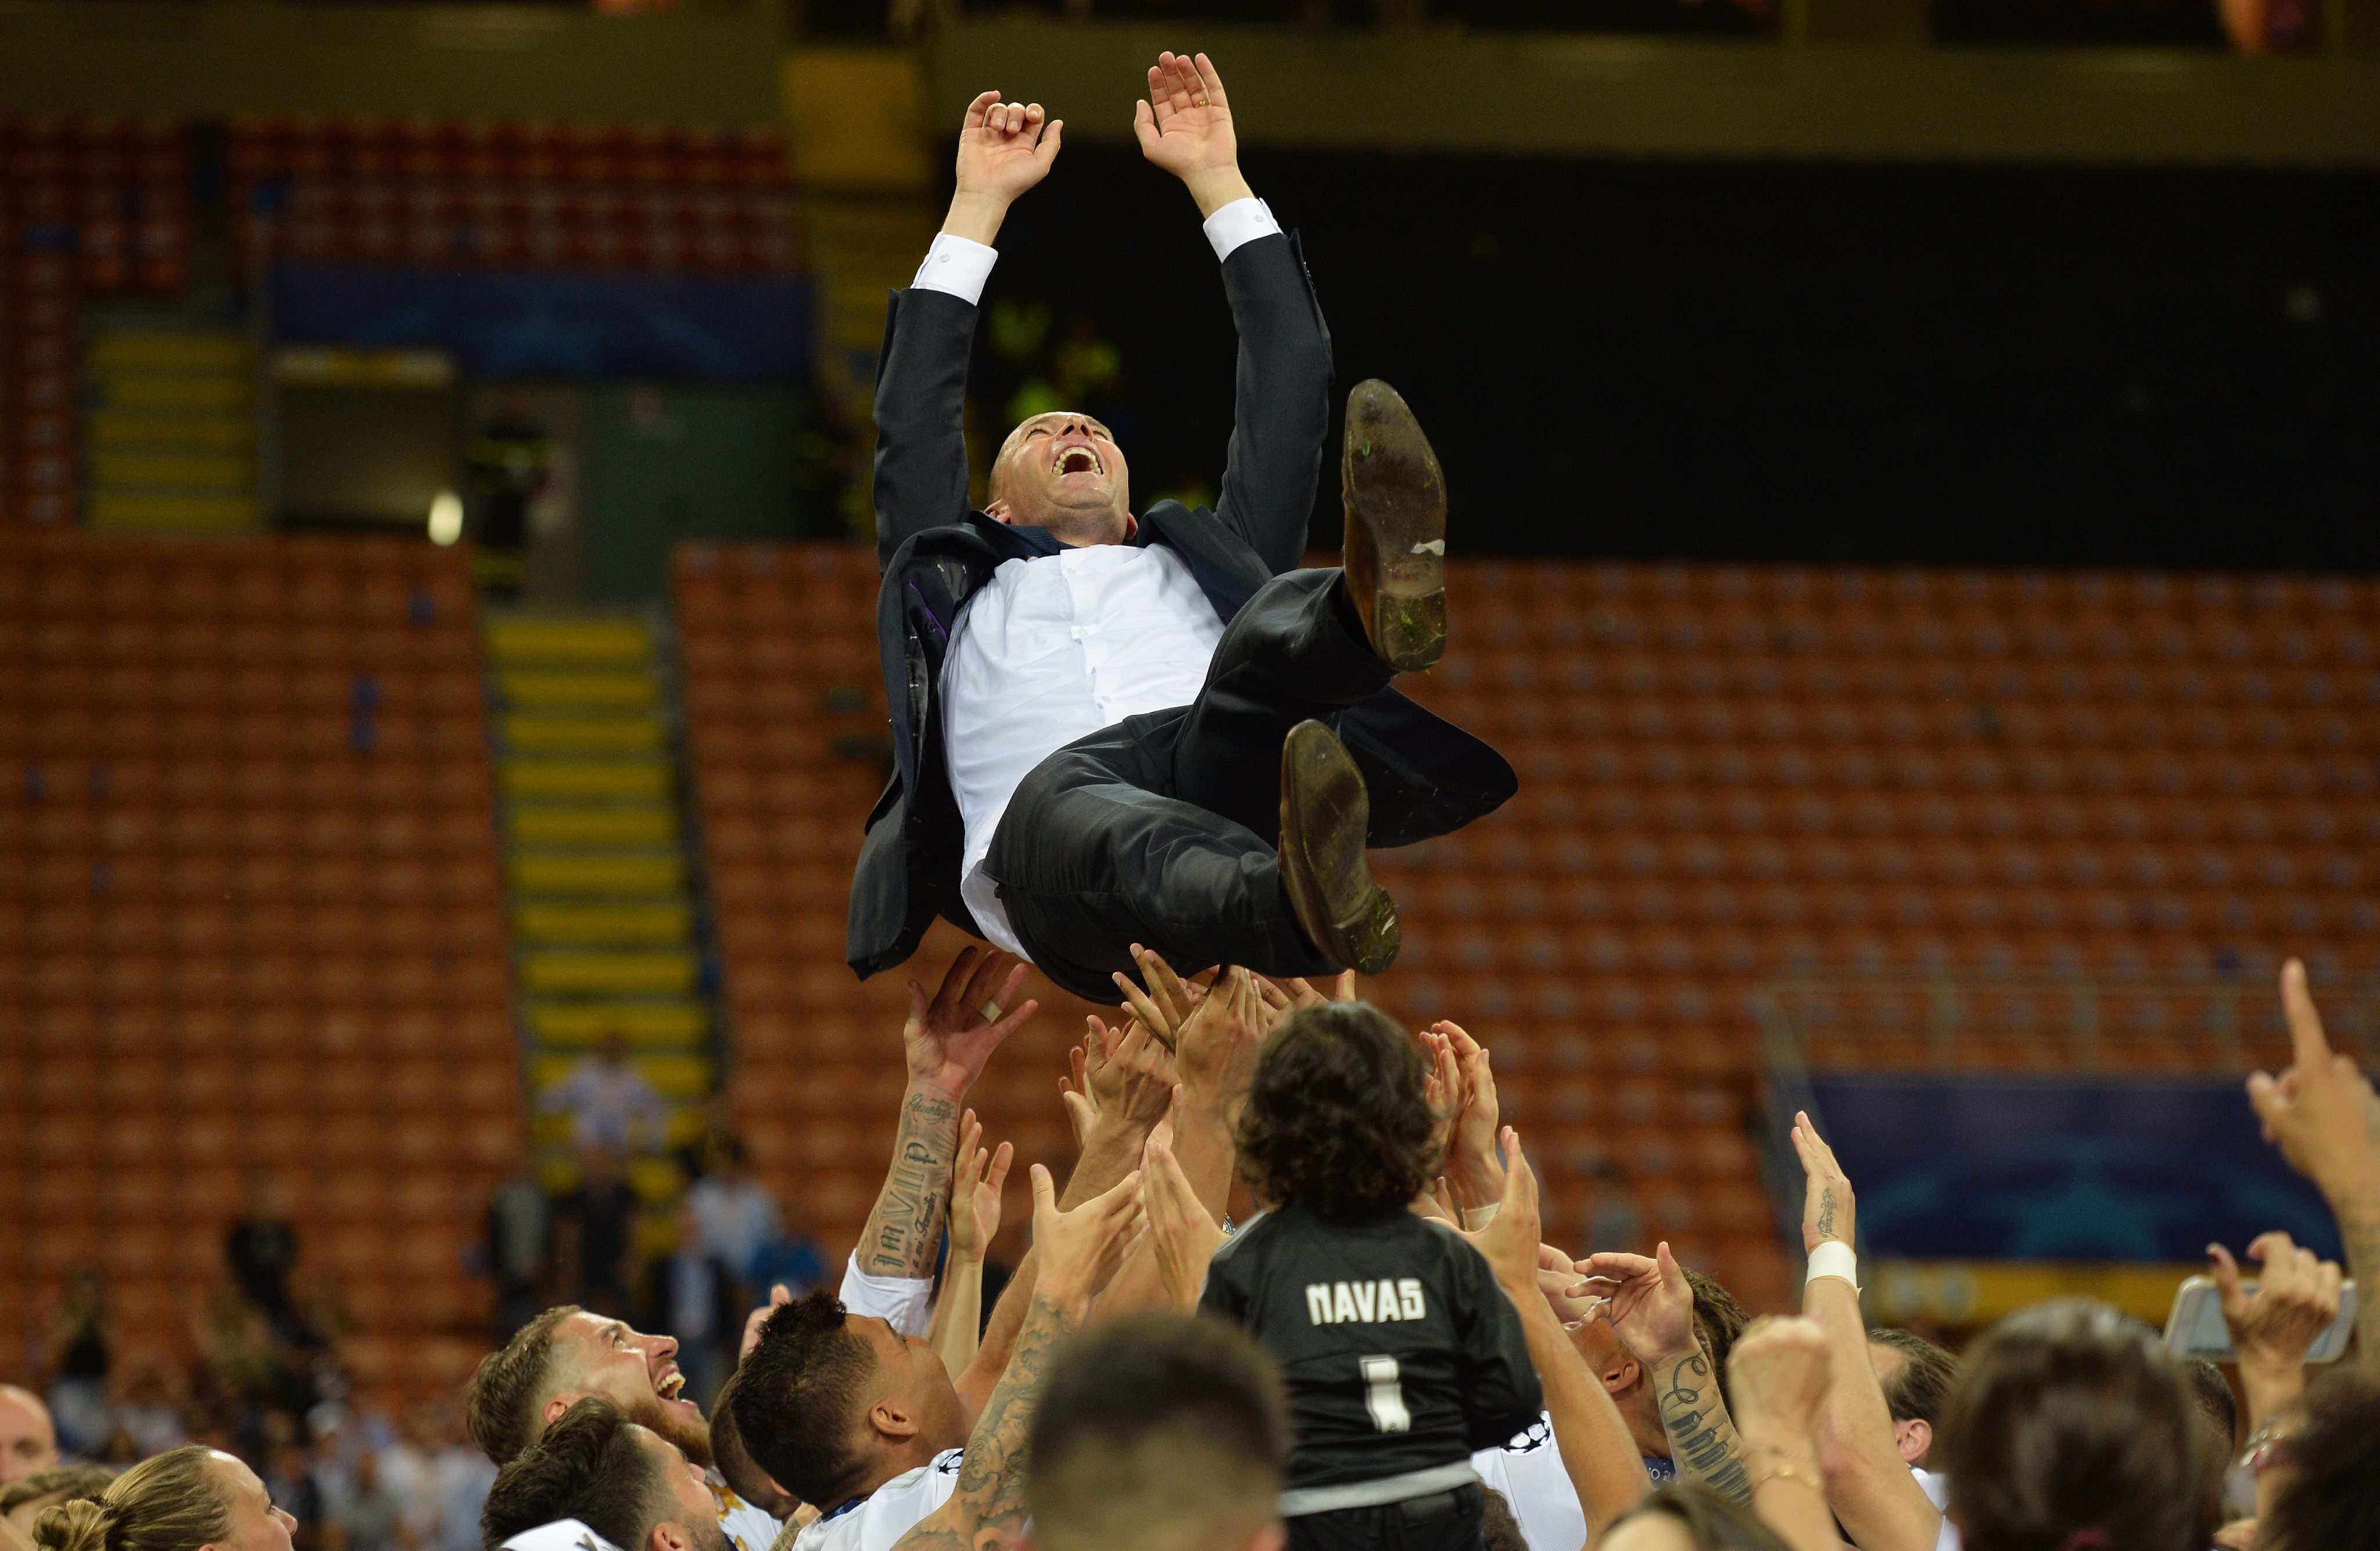 Real Madrid manager Zinedine Zidane has now won the Champions League as a player and a manager. Photo: EPA